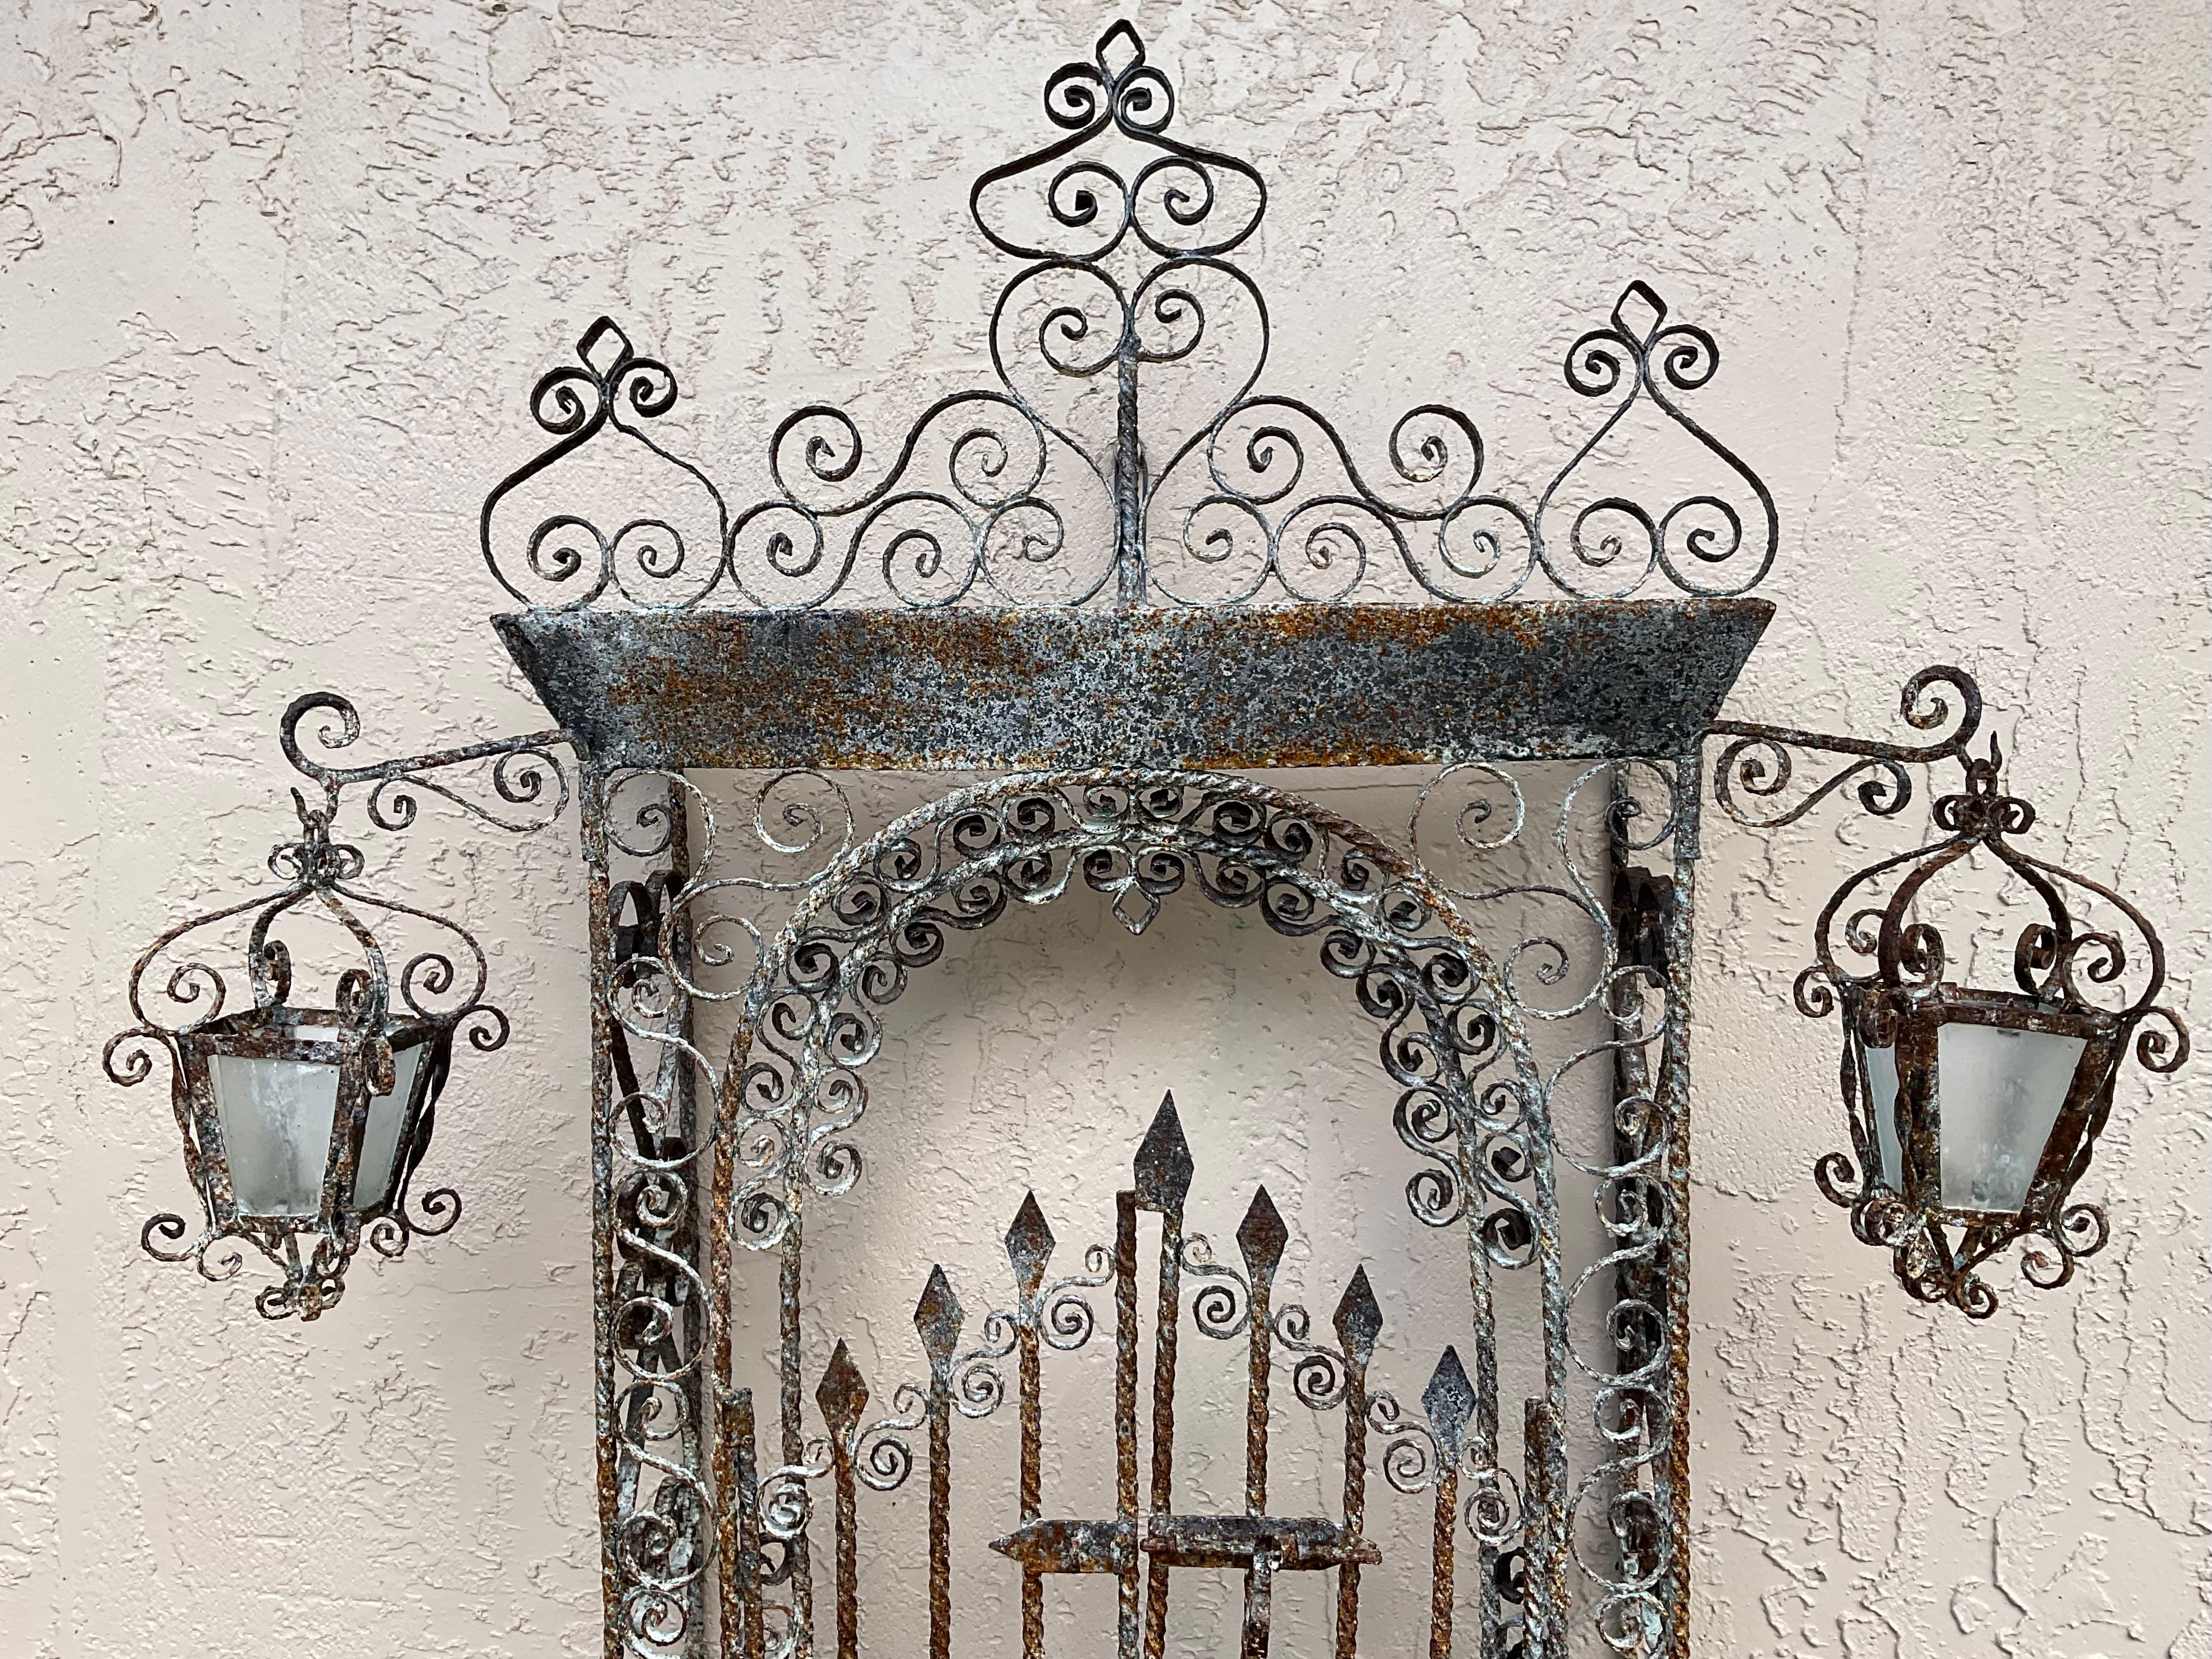 North American Vintage Wall Hanging Palm Beach Wrought Iron Gate Mizner Style For Sale